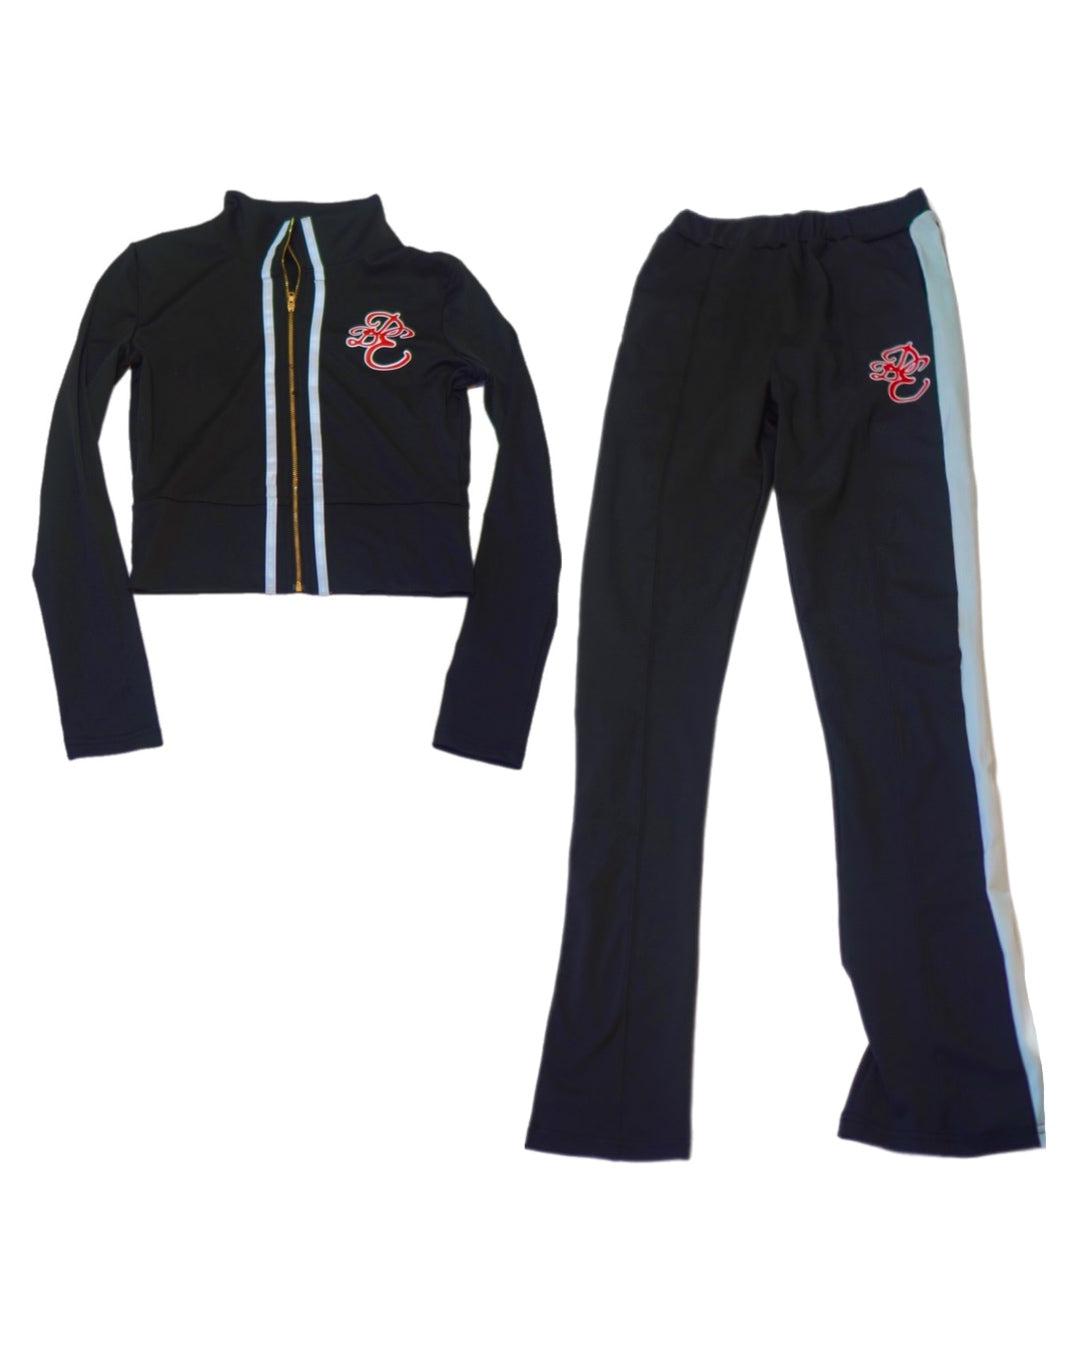 DYNASTY Womans Grey Tracksuit